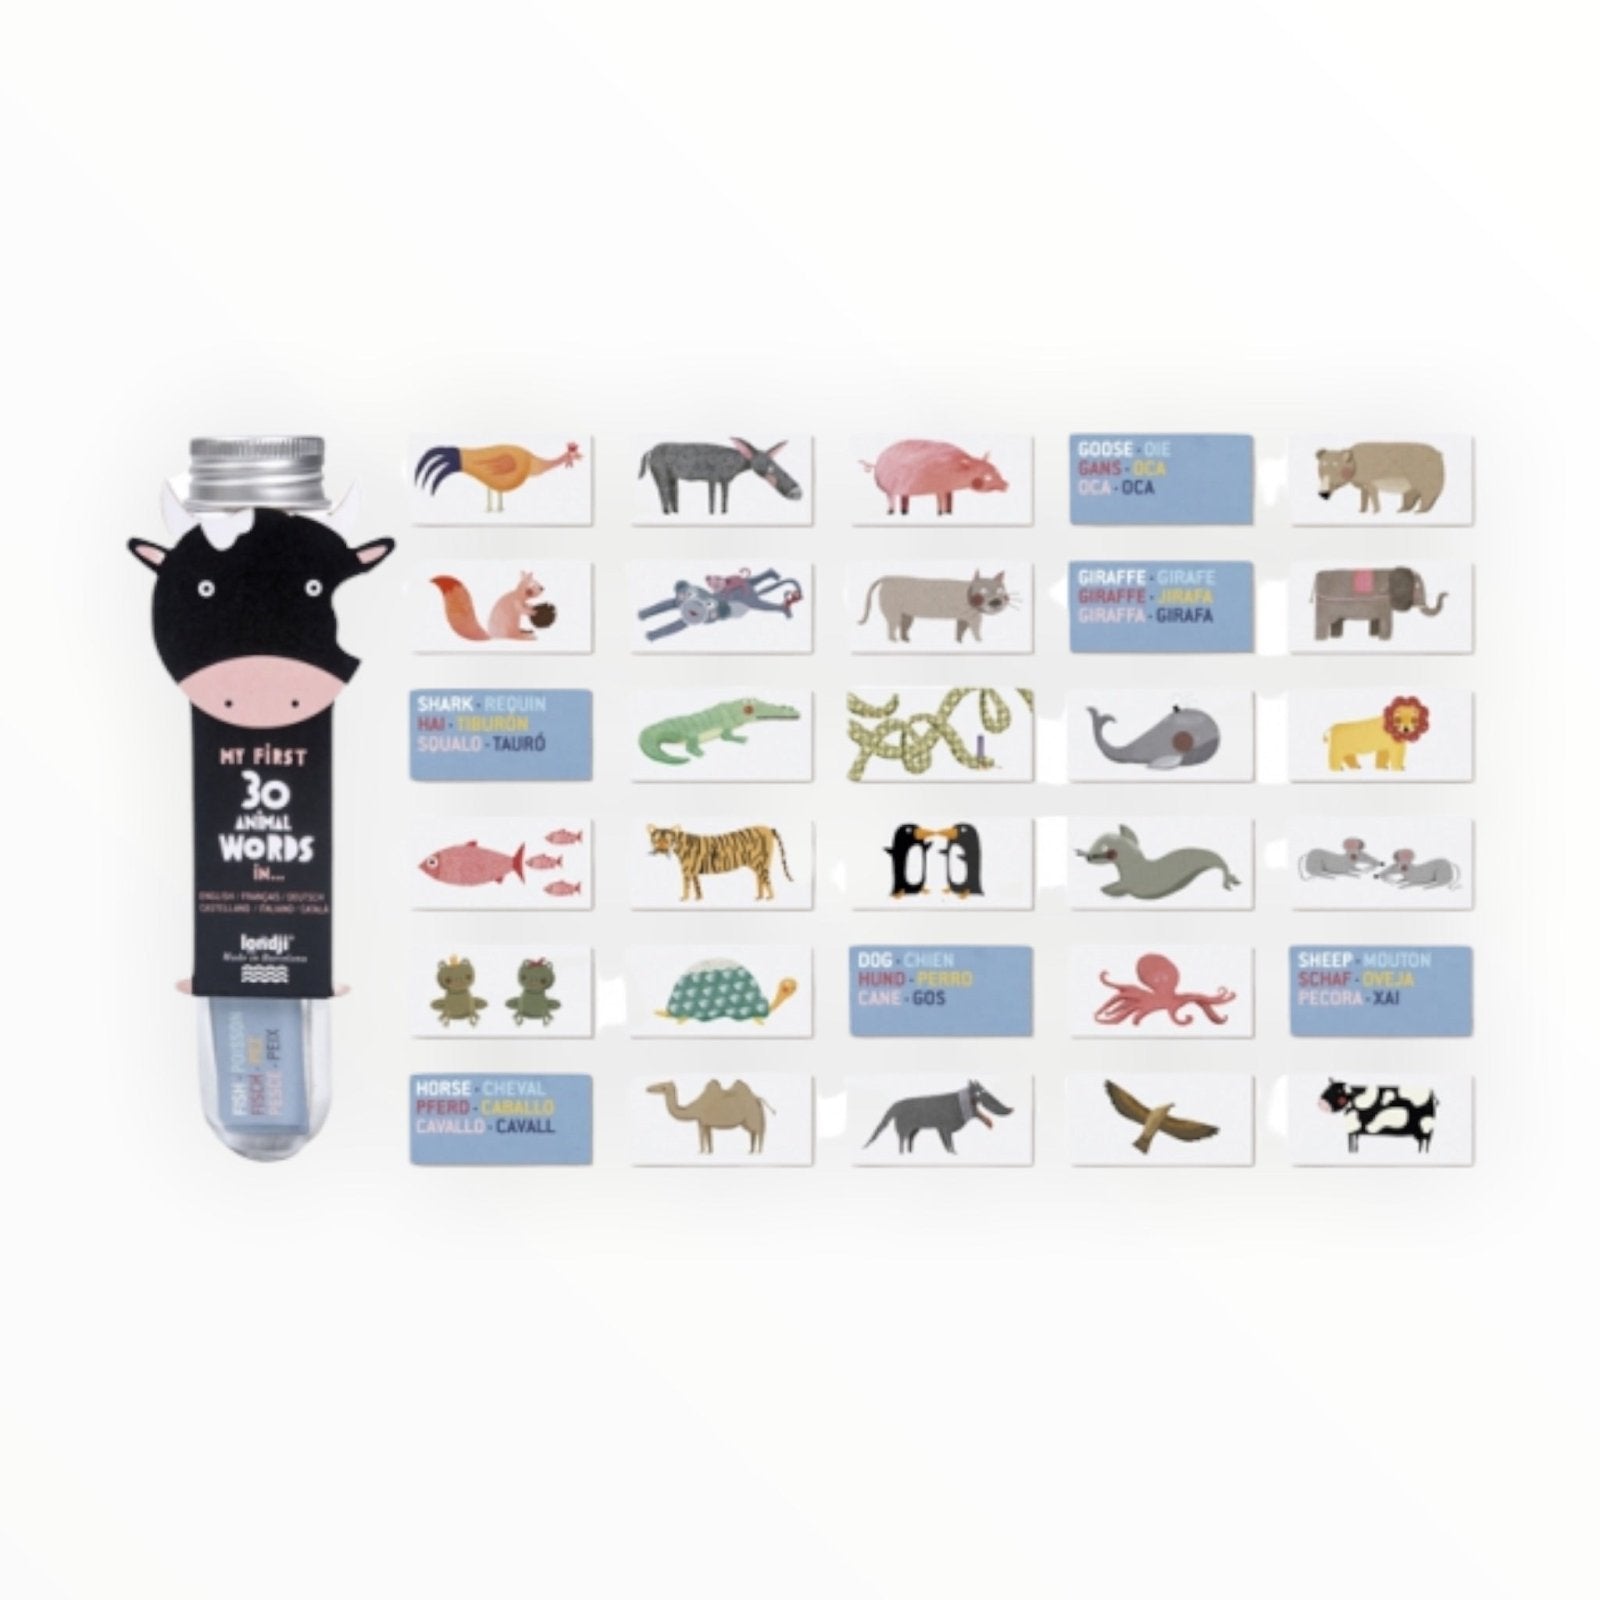 MINI GAMES - Animal Dictionary find Stylish Fashion for Little People- at Little Foxx Concept Store